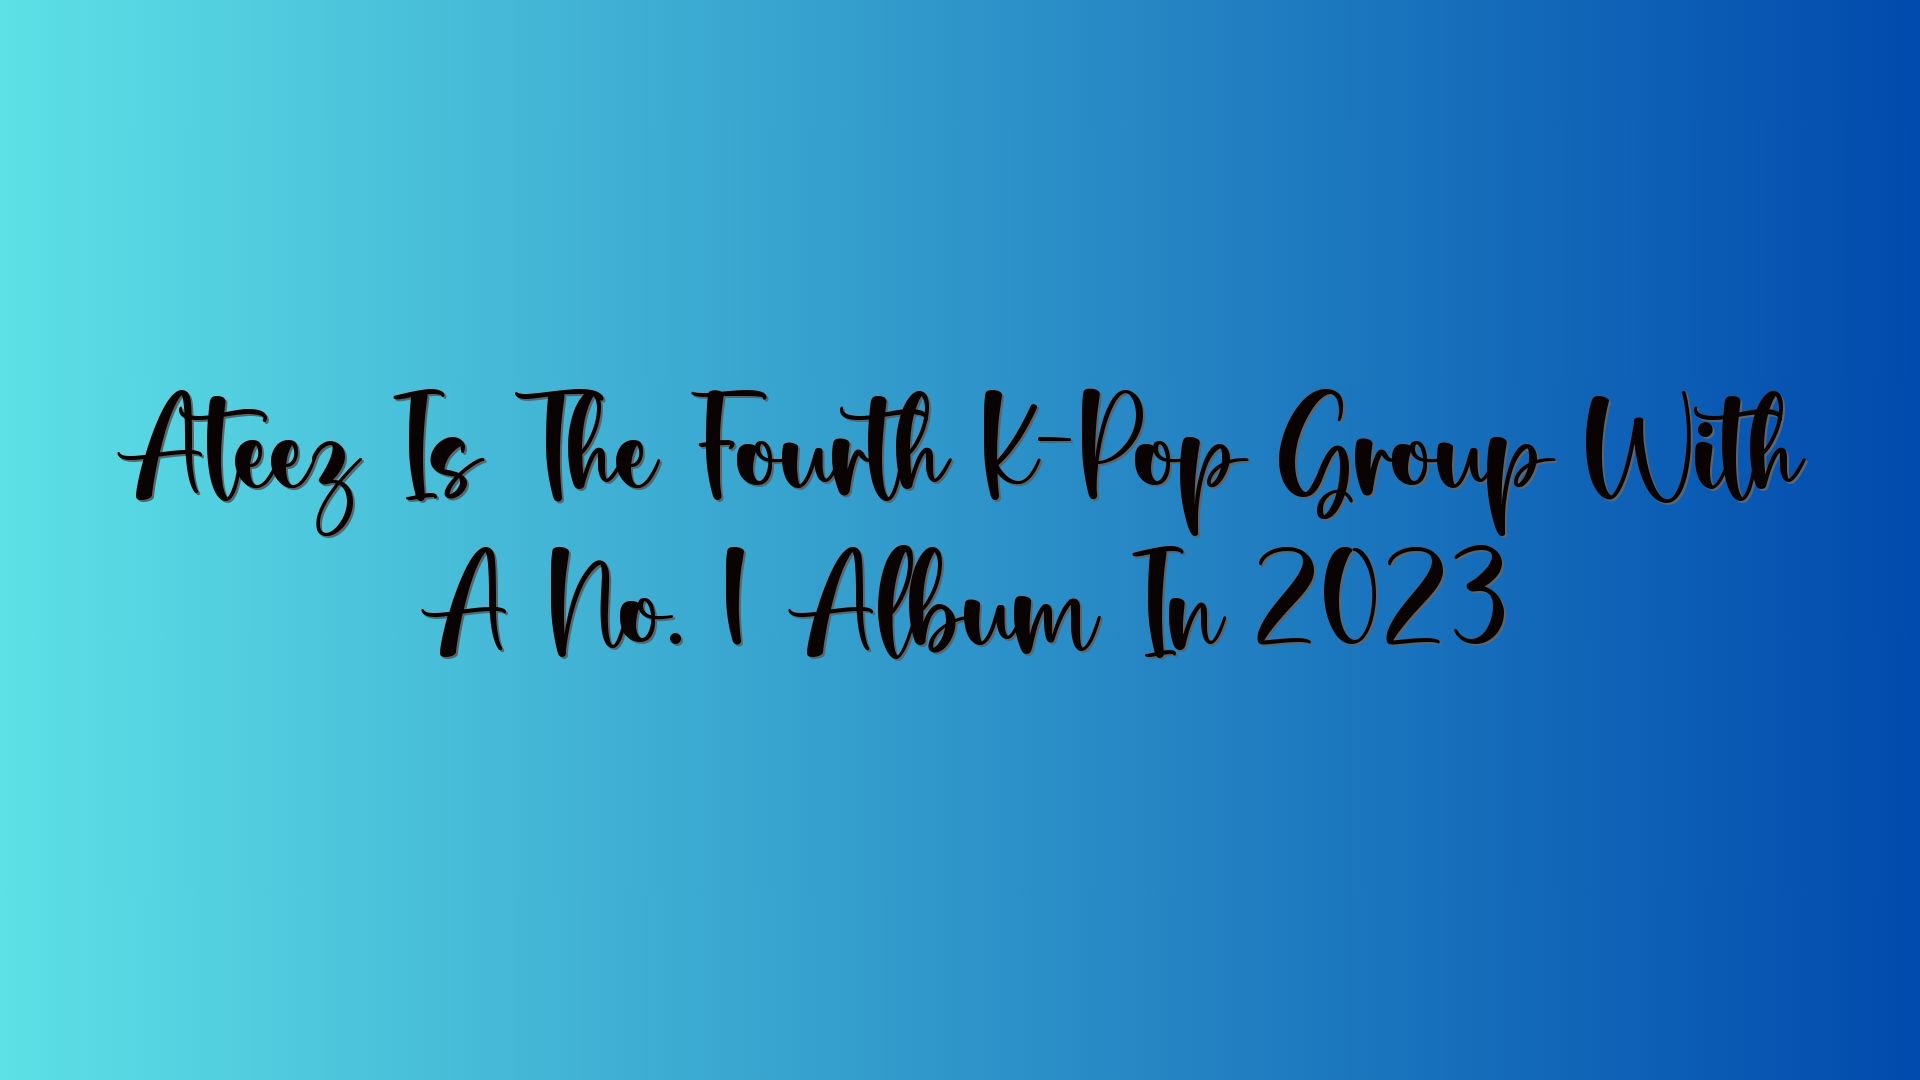 Ateez Is The Fourth K-Pop Group With A No. 1 Album In 2023